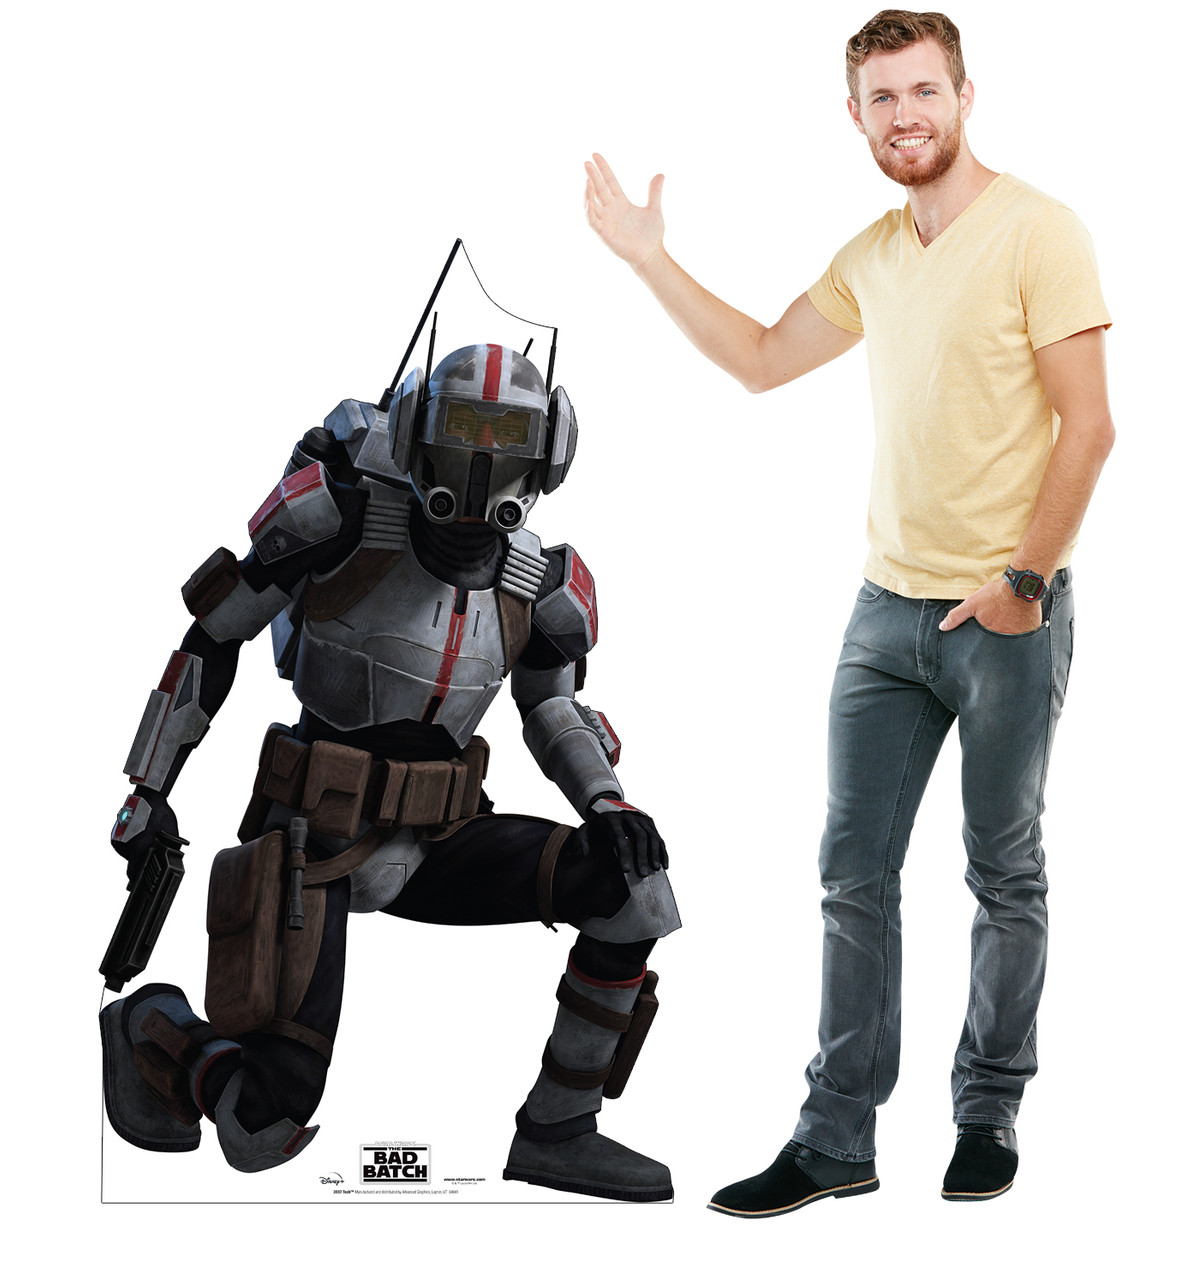 Life-size cardboard standee of Tech from The Bad Batch on Disney+ with model.